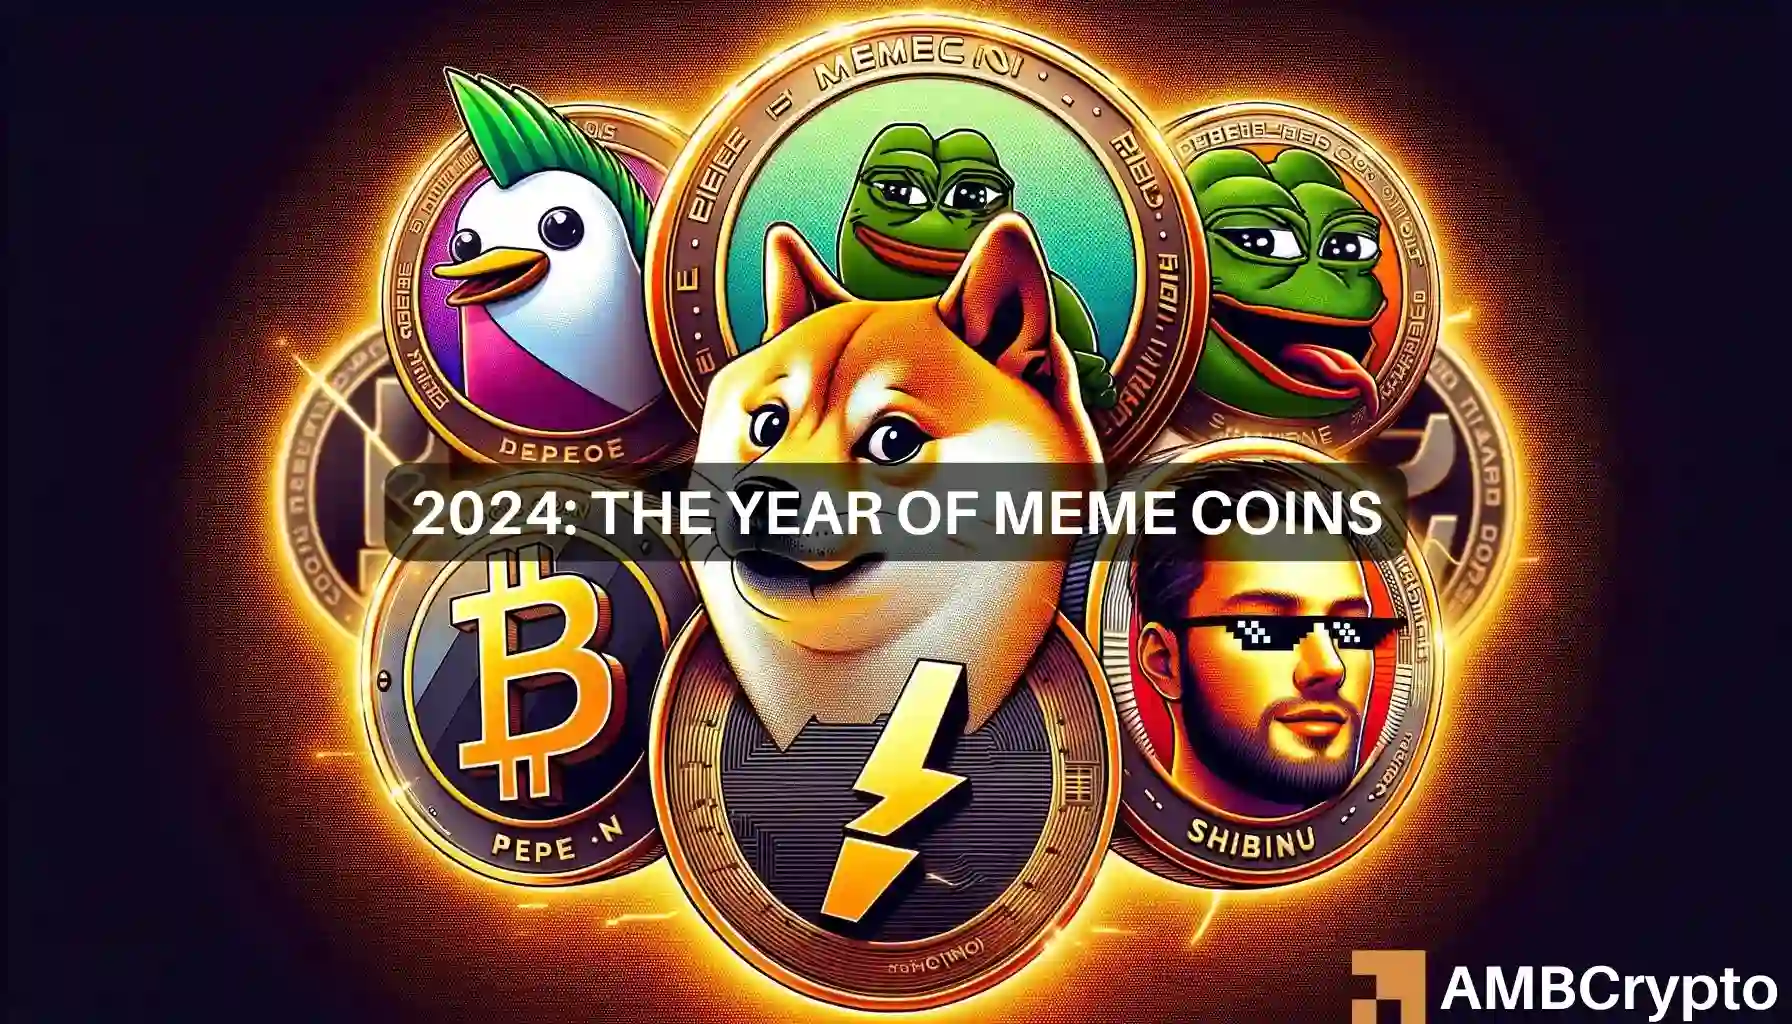 Will ongoing memecoin mania lead to a new 'asset class'?